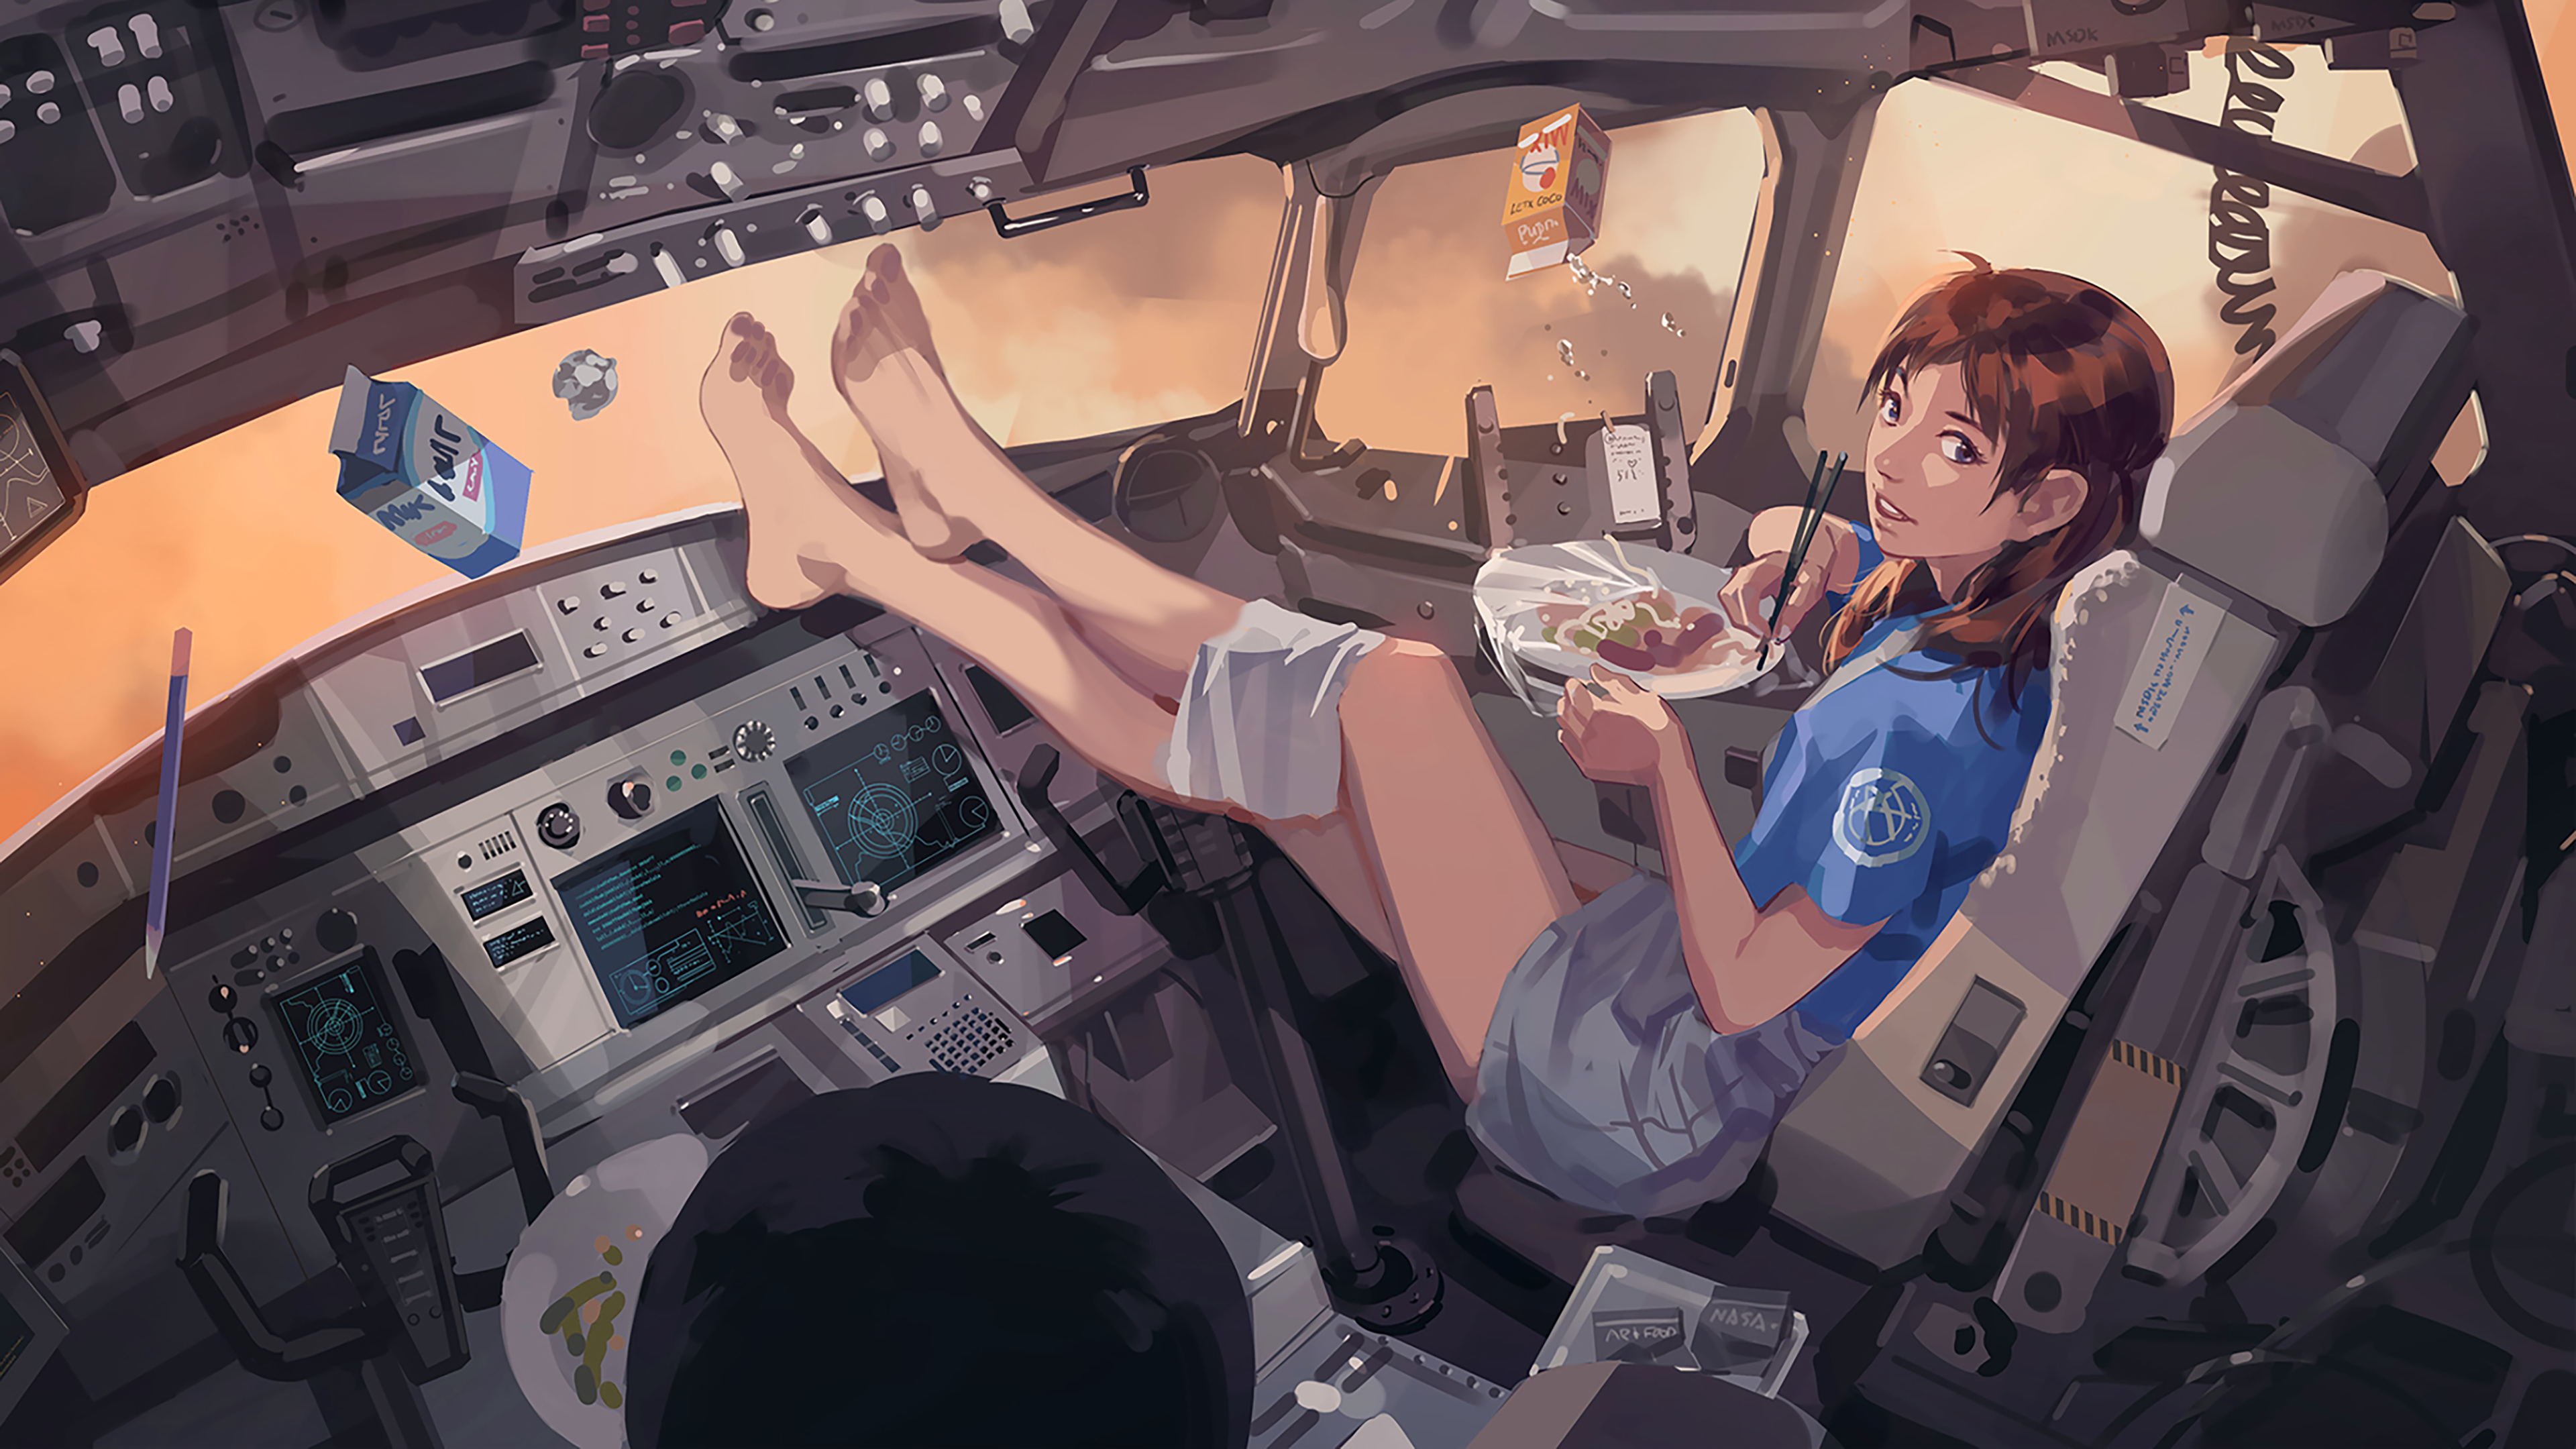 Space Space Shuttle Pilot Astronaut Legs Crossed Sitting Eating Vehicle Interiors 3840x2160